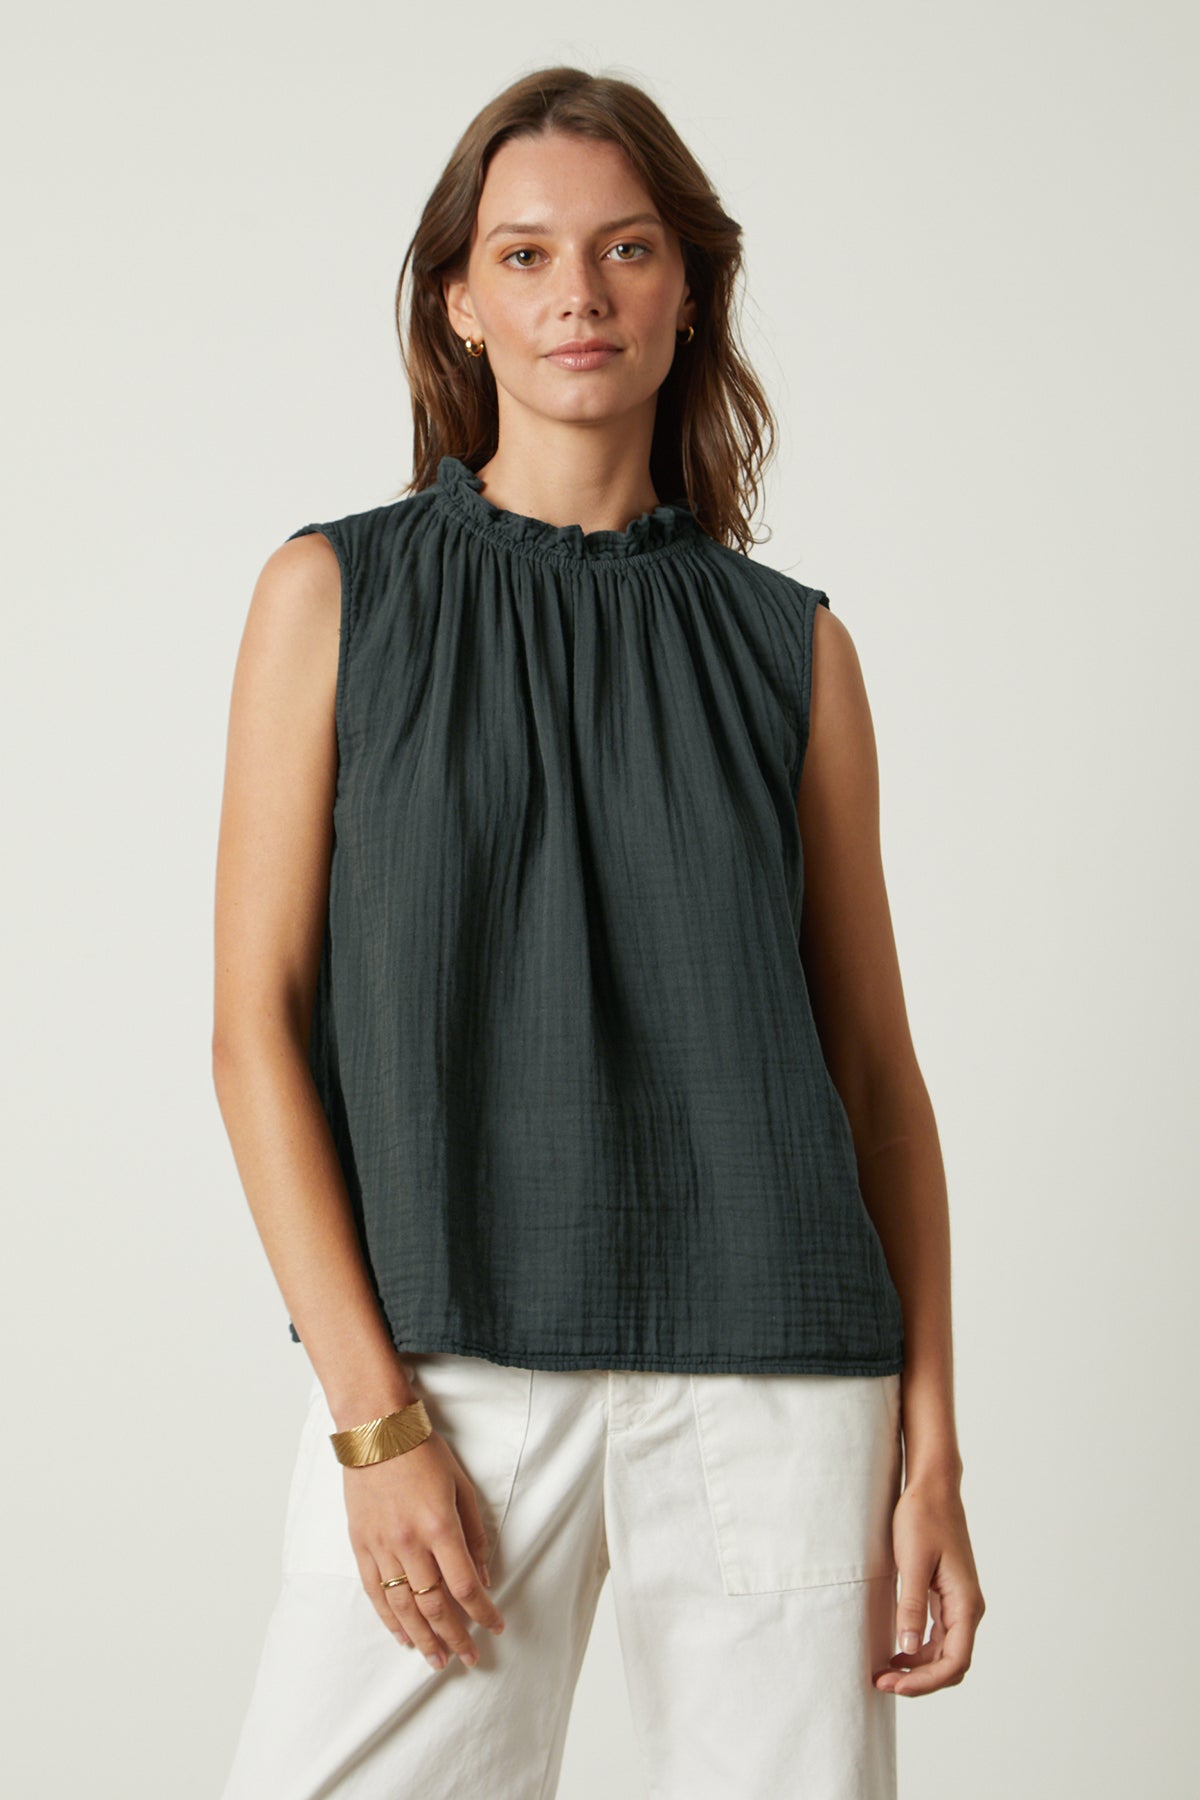 The Velvet by Graham & Spencer BIANCA COTTON GAUZE TANK TOP is made of linen and has a ruffled sleeve.-26317043171521